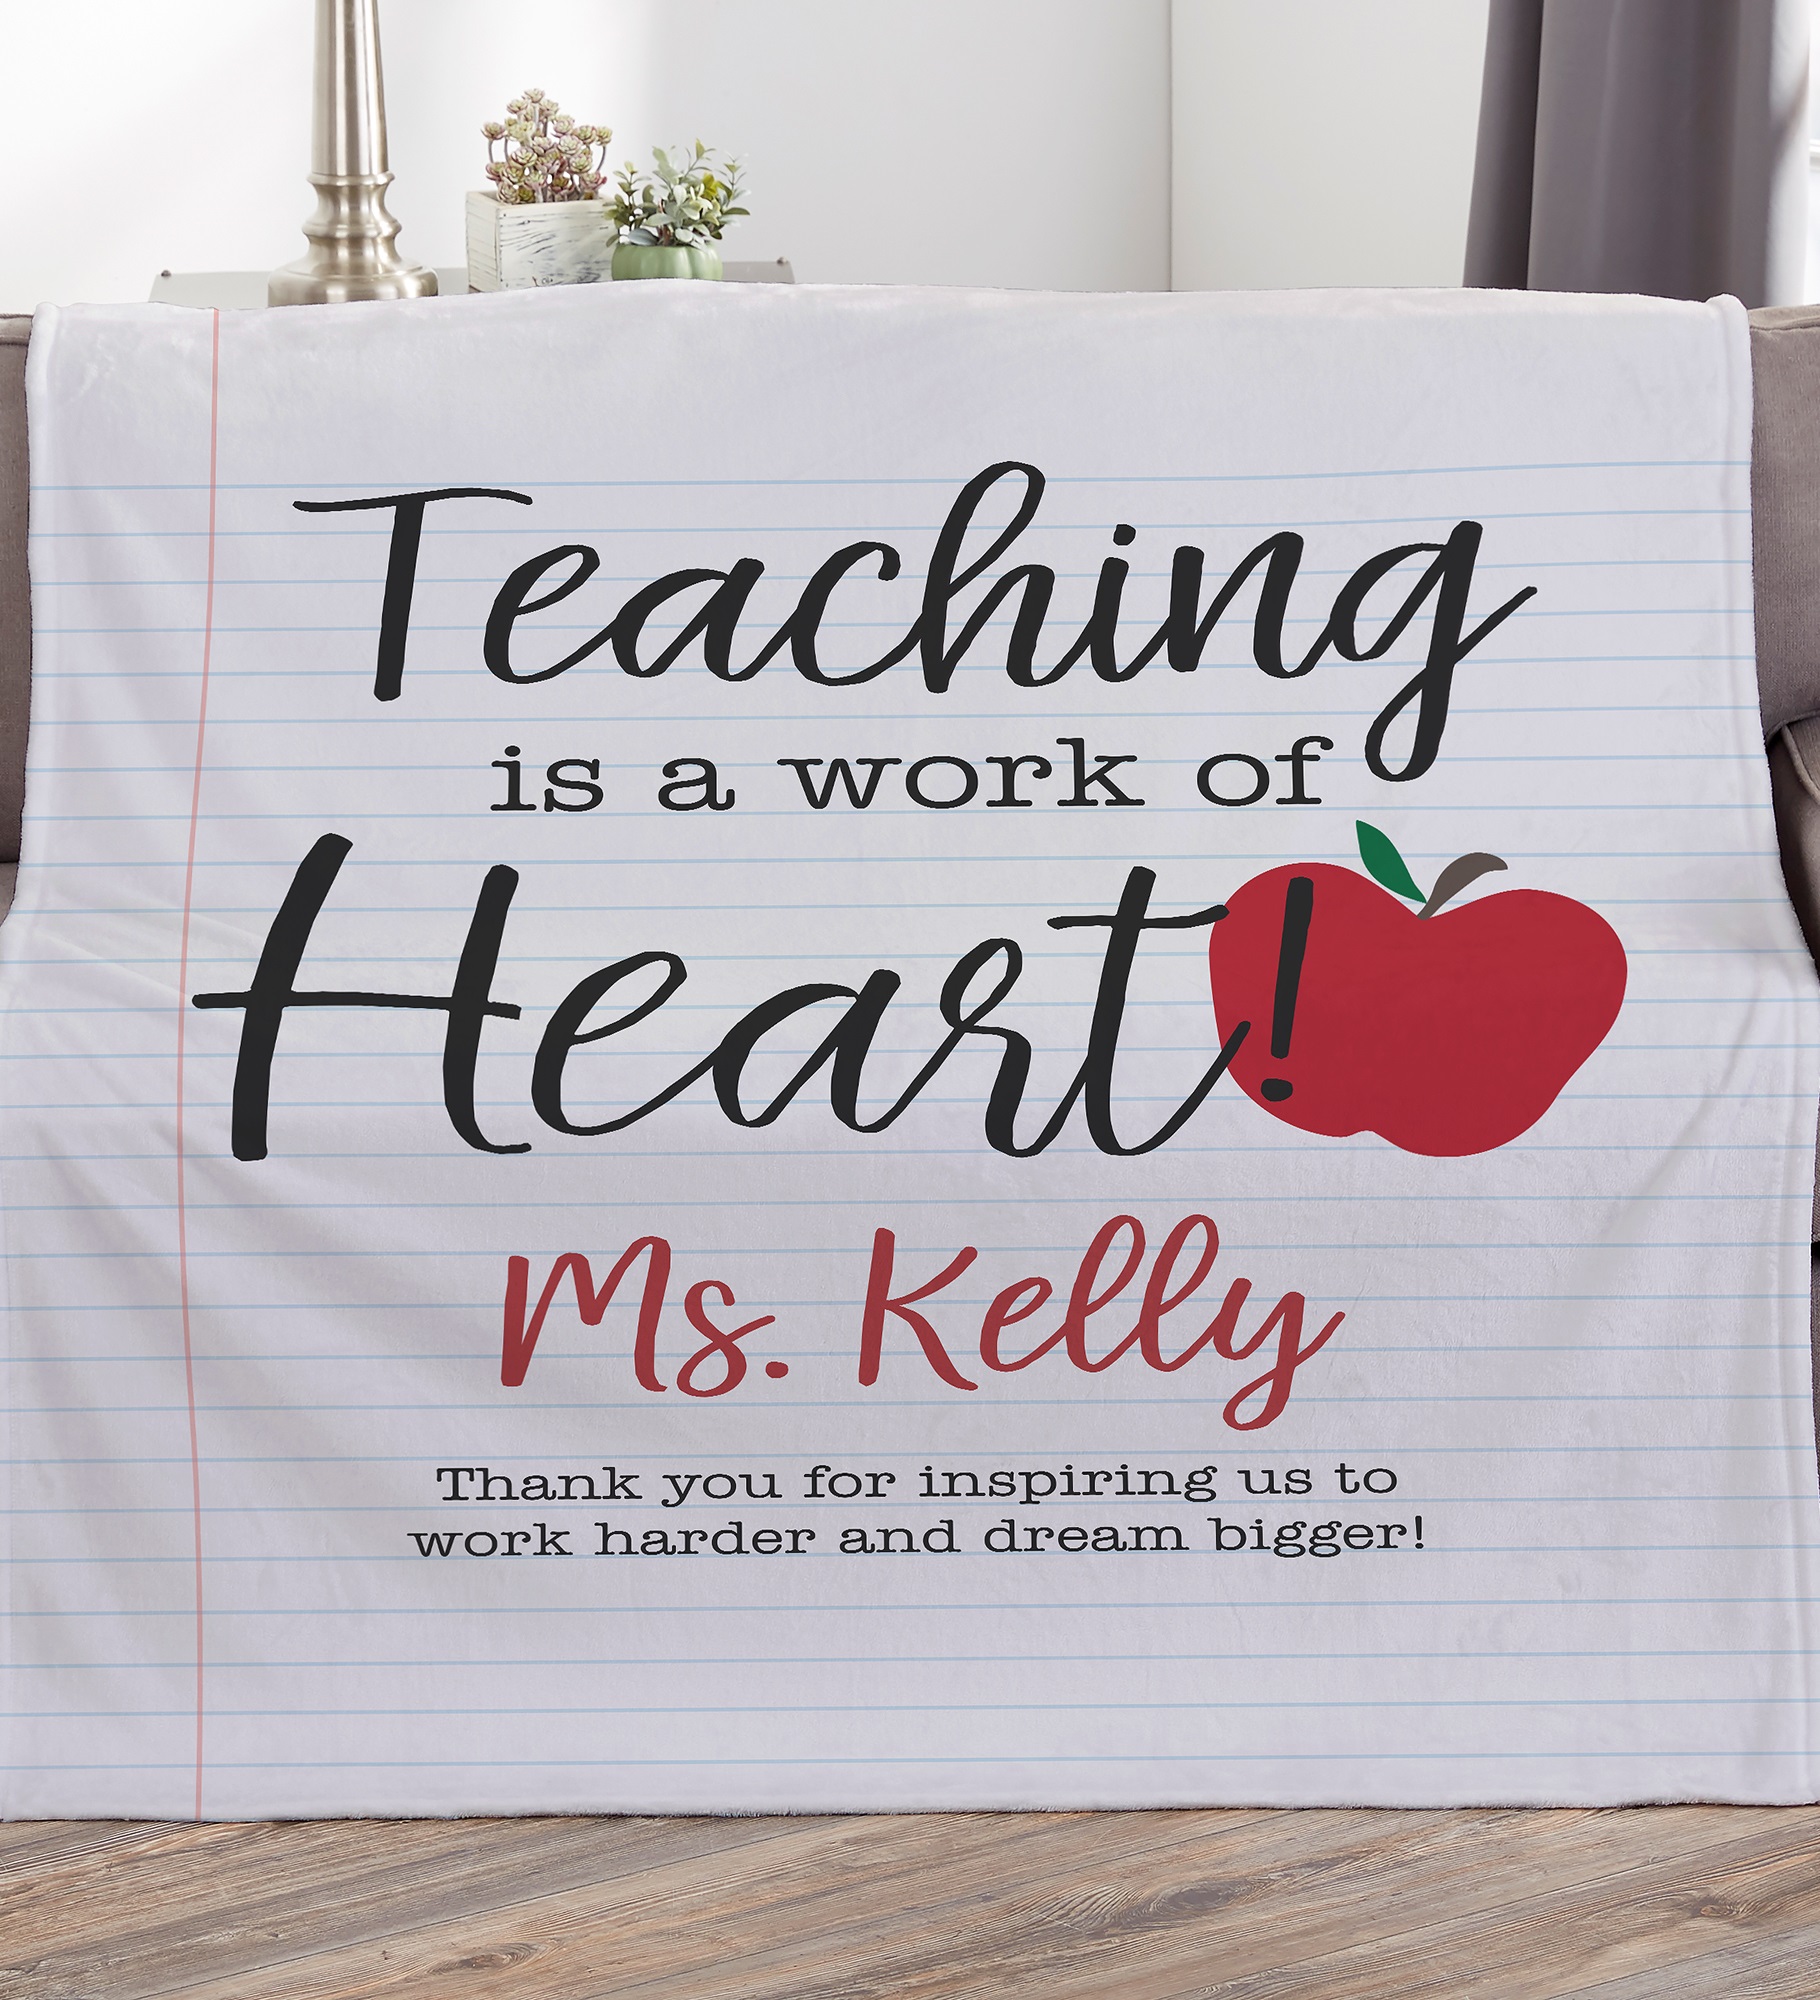 Kelly's Korner's Show Us Your Life topic this week is Ideas for Teacher  Gifts. And, as a teacher, I consider i…